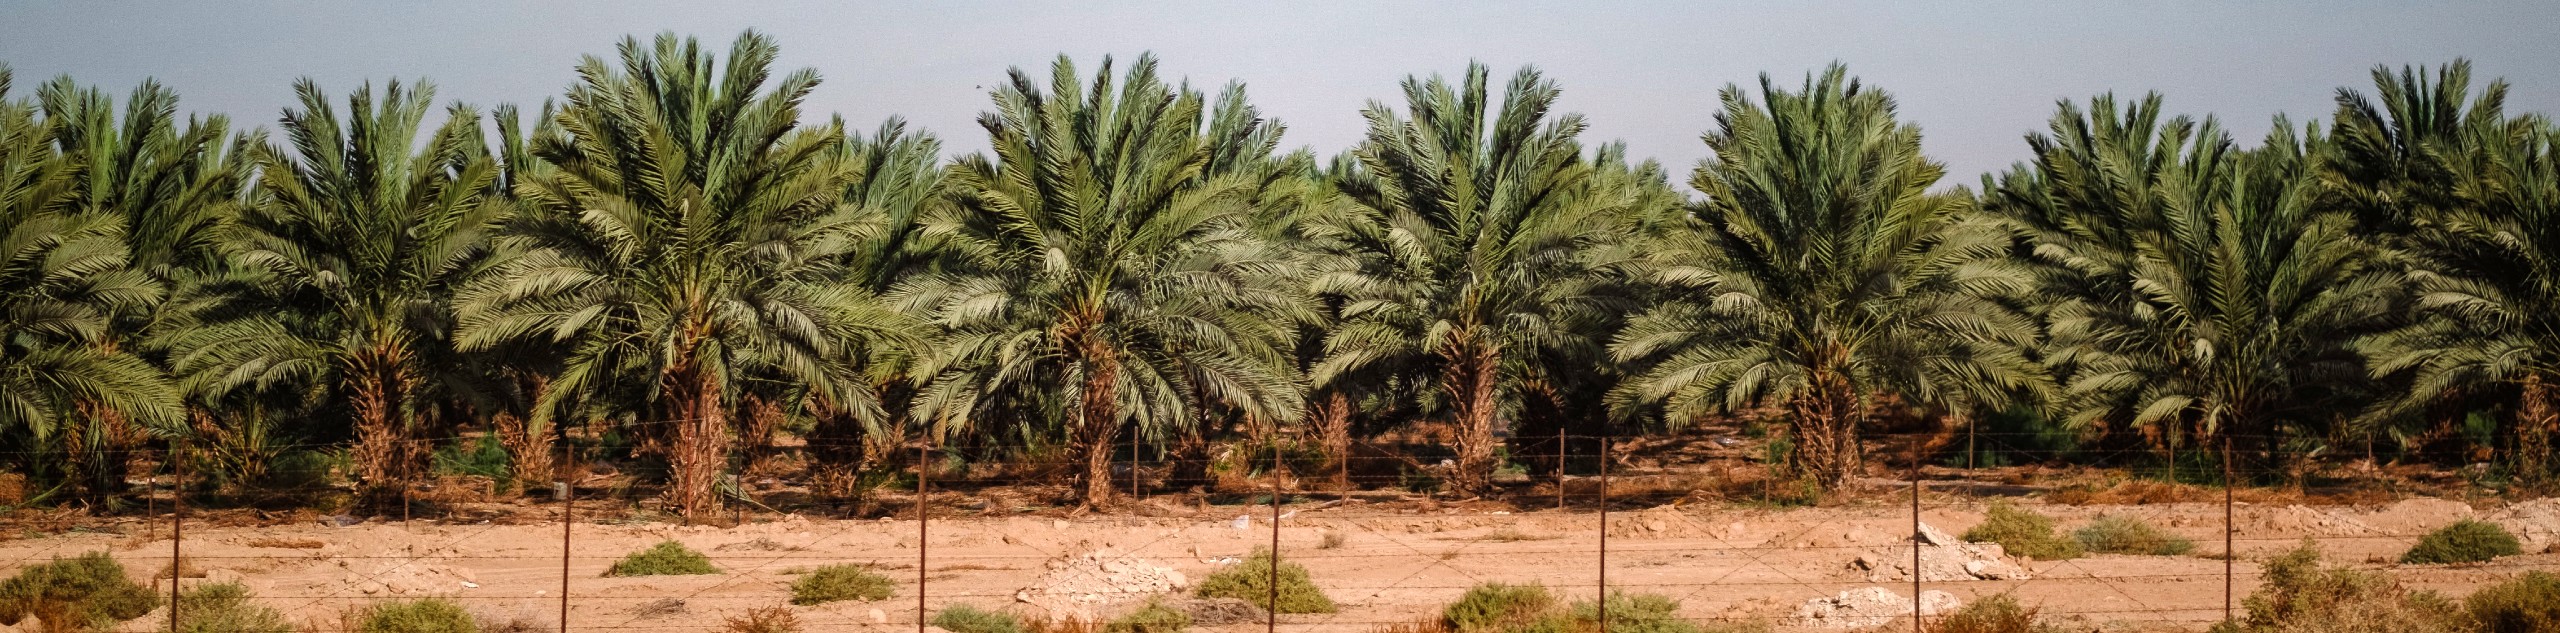 Palm trees at West Bank in Jerusalem